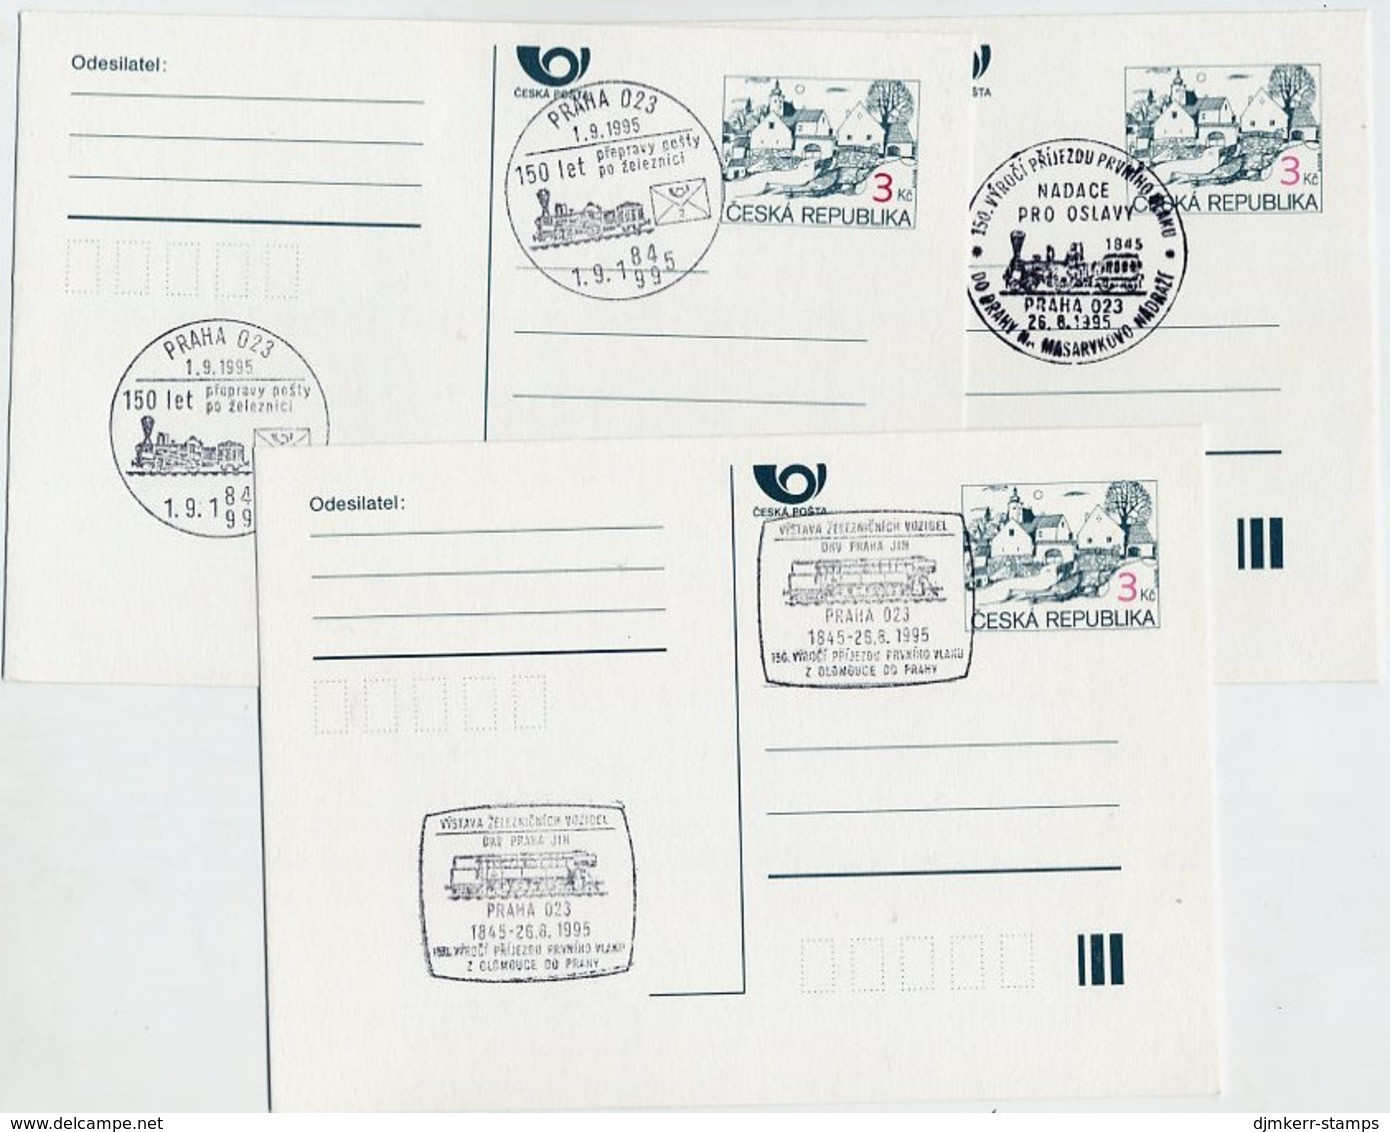 CZECH REPUBLIC 1995 Railway Anniversary 3 Kc.stationery Cards Cancelled With Commemorative Postmarks. - Covers & Documents